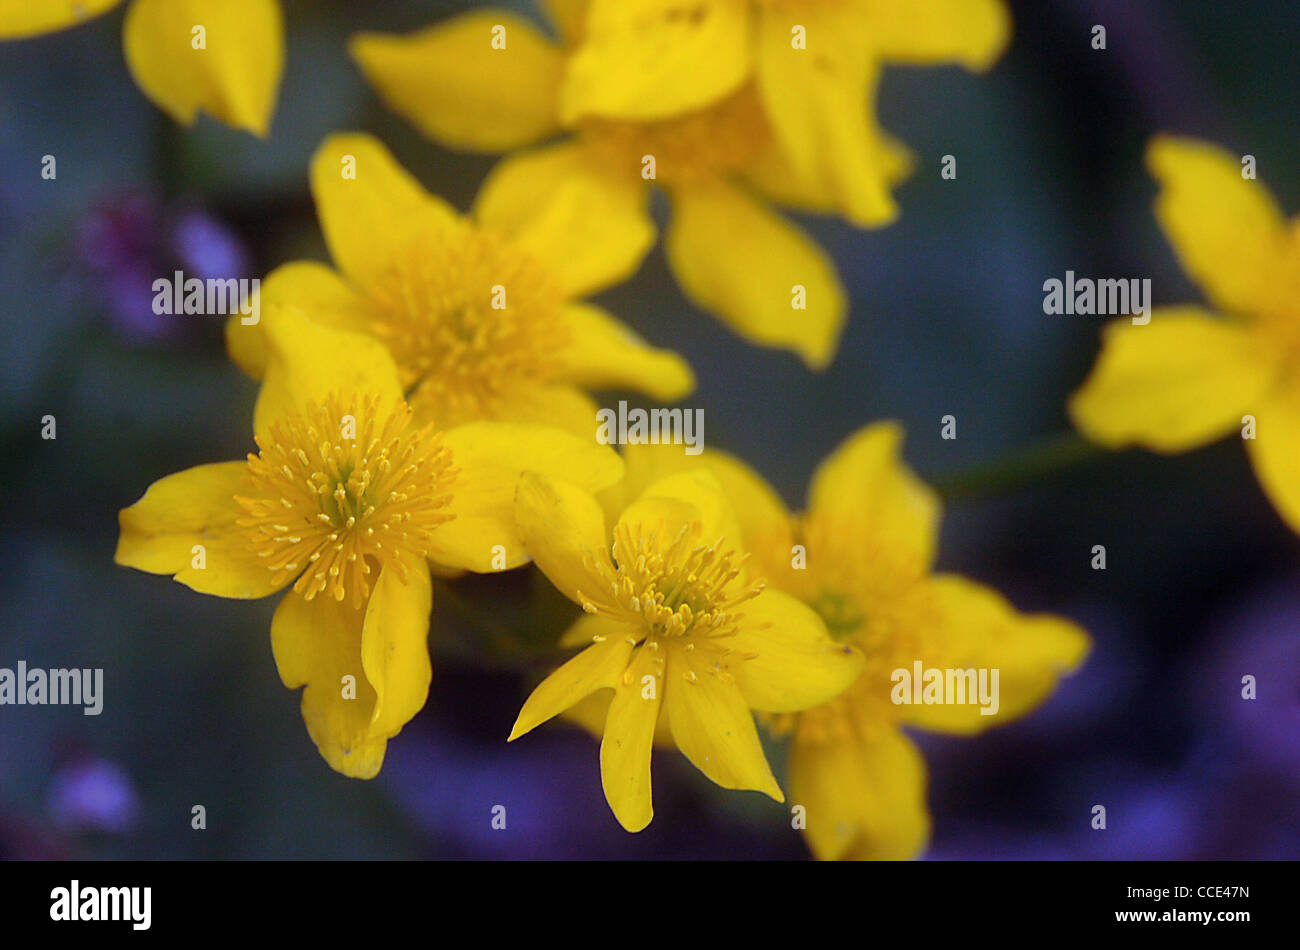 MARSH MARIGOLDS ON A GARDEN POND IN HAMPSHIRE Stock Photo